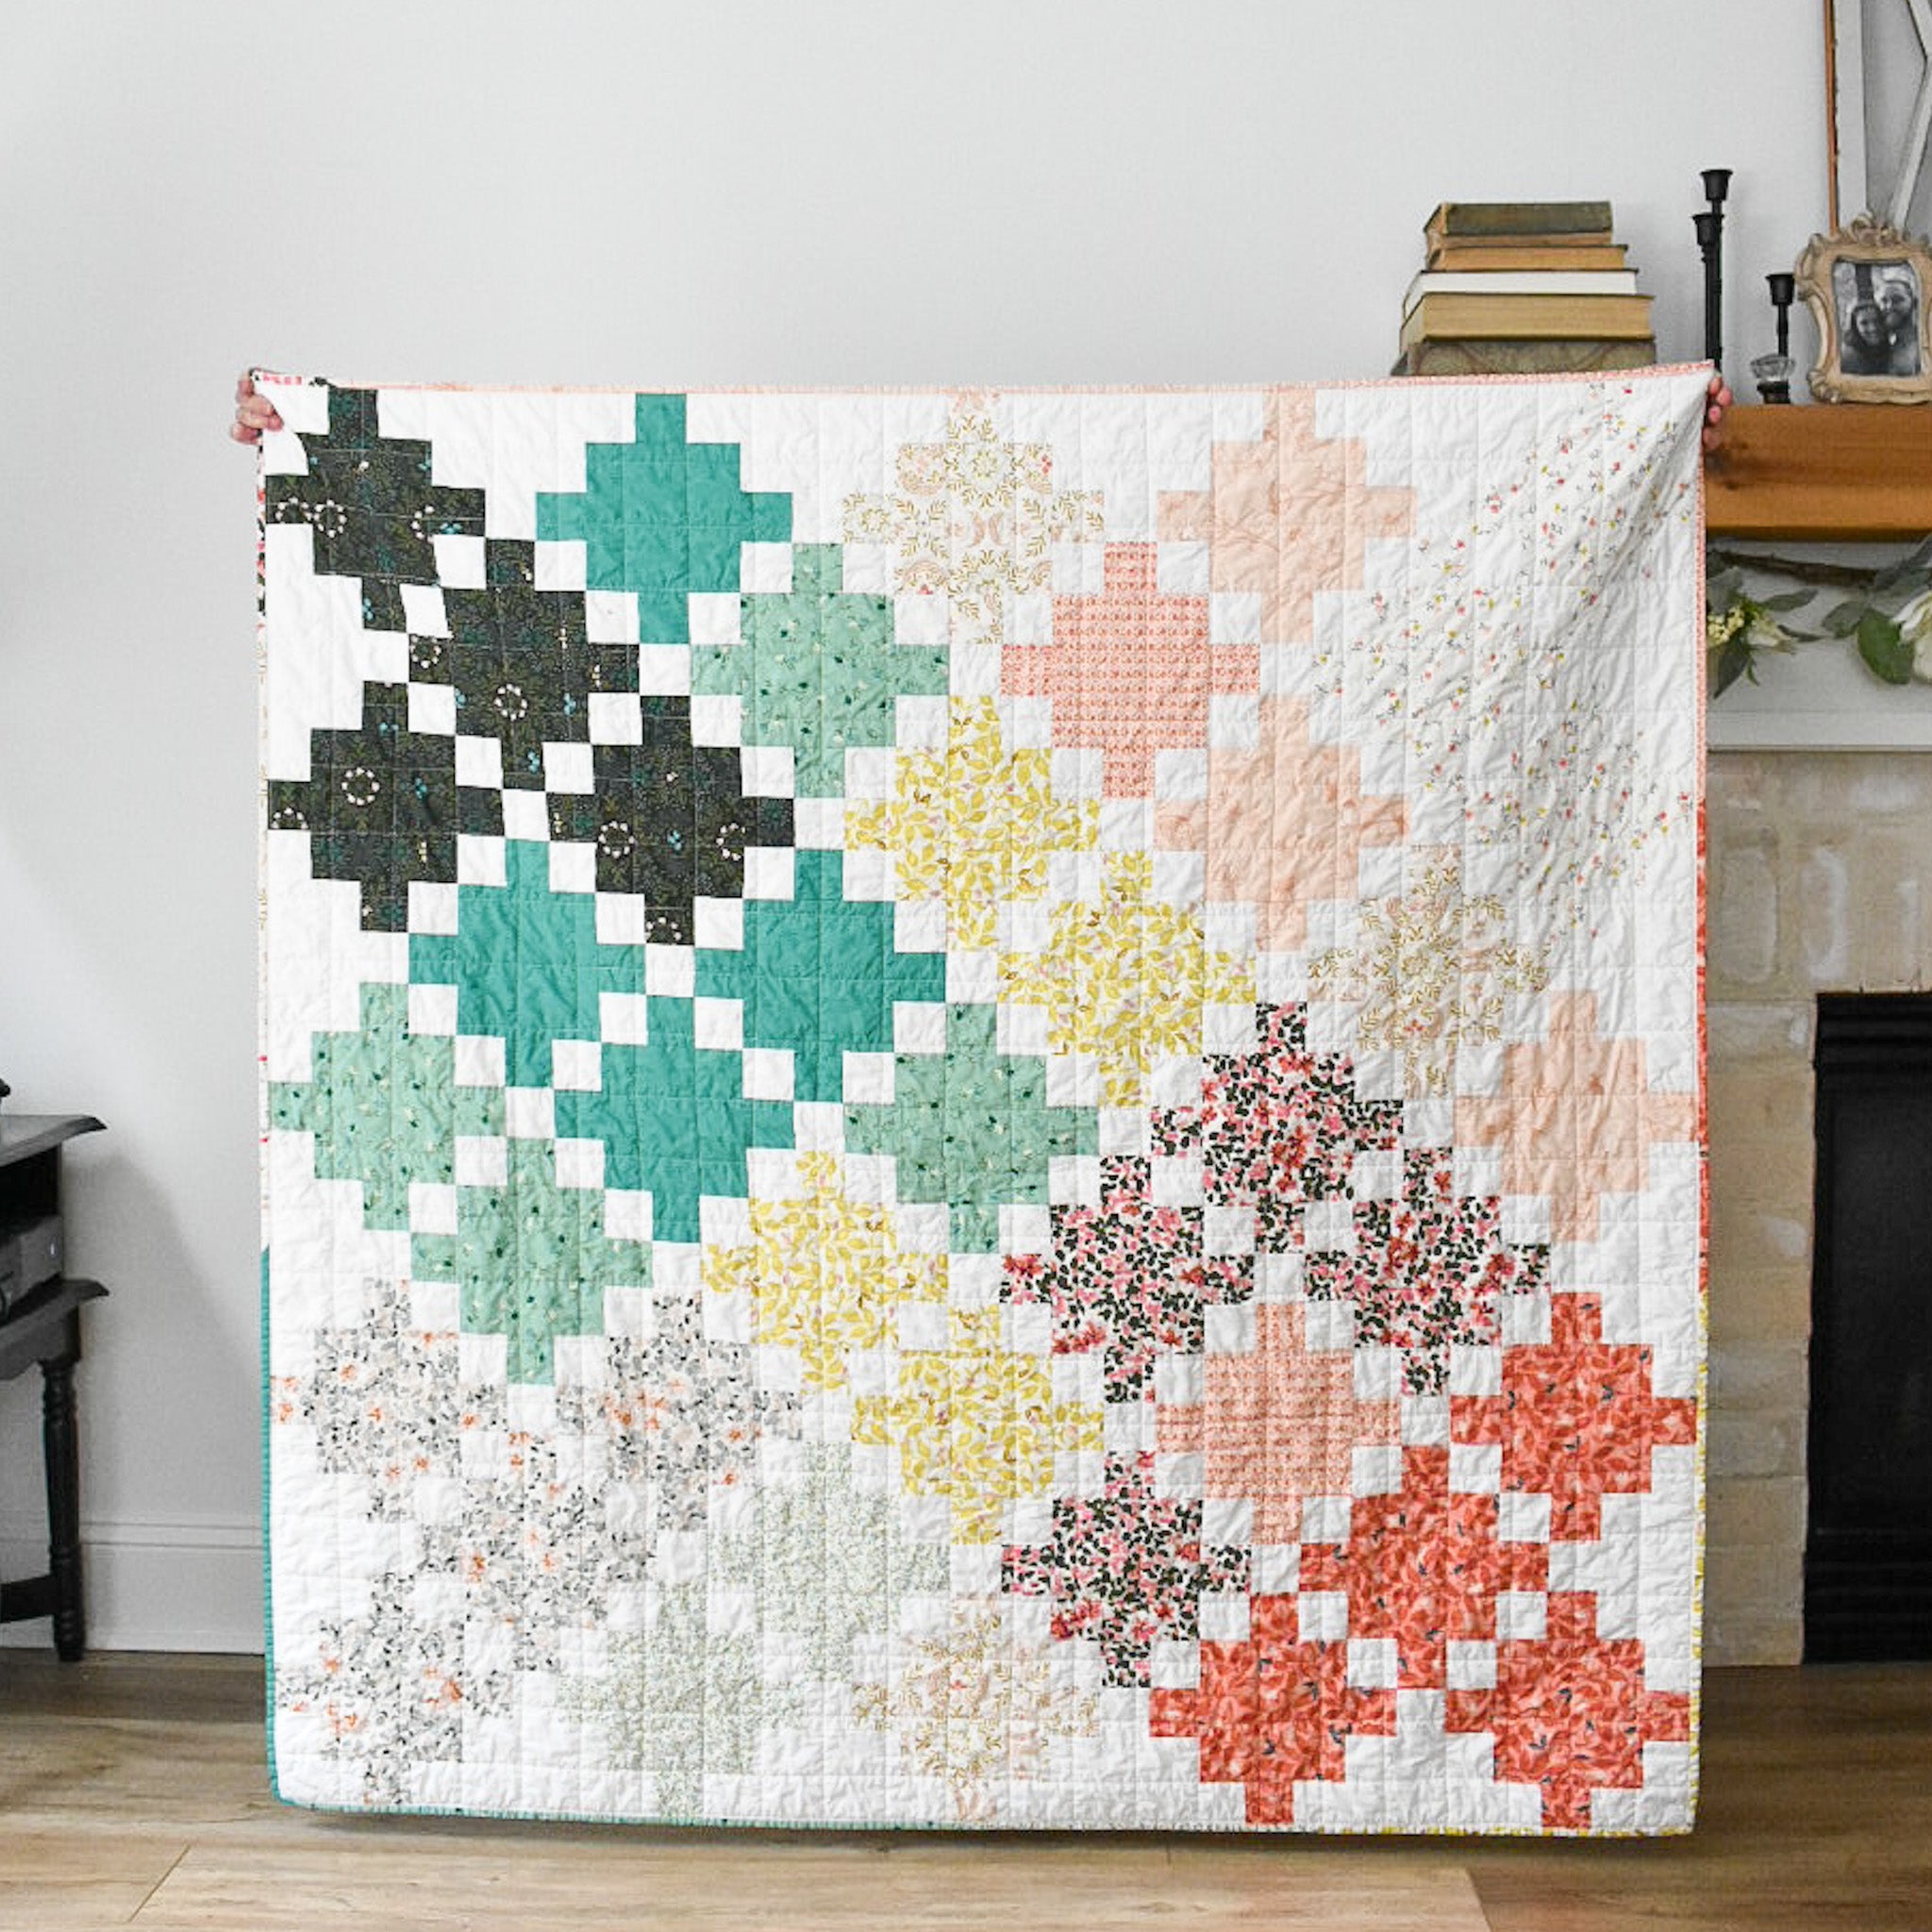 How to Make the Antique Tile Quilt Block - Create Whimsy